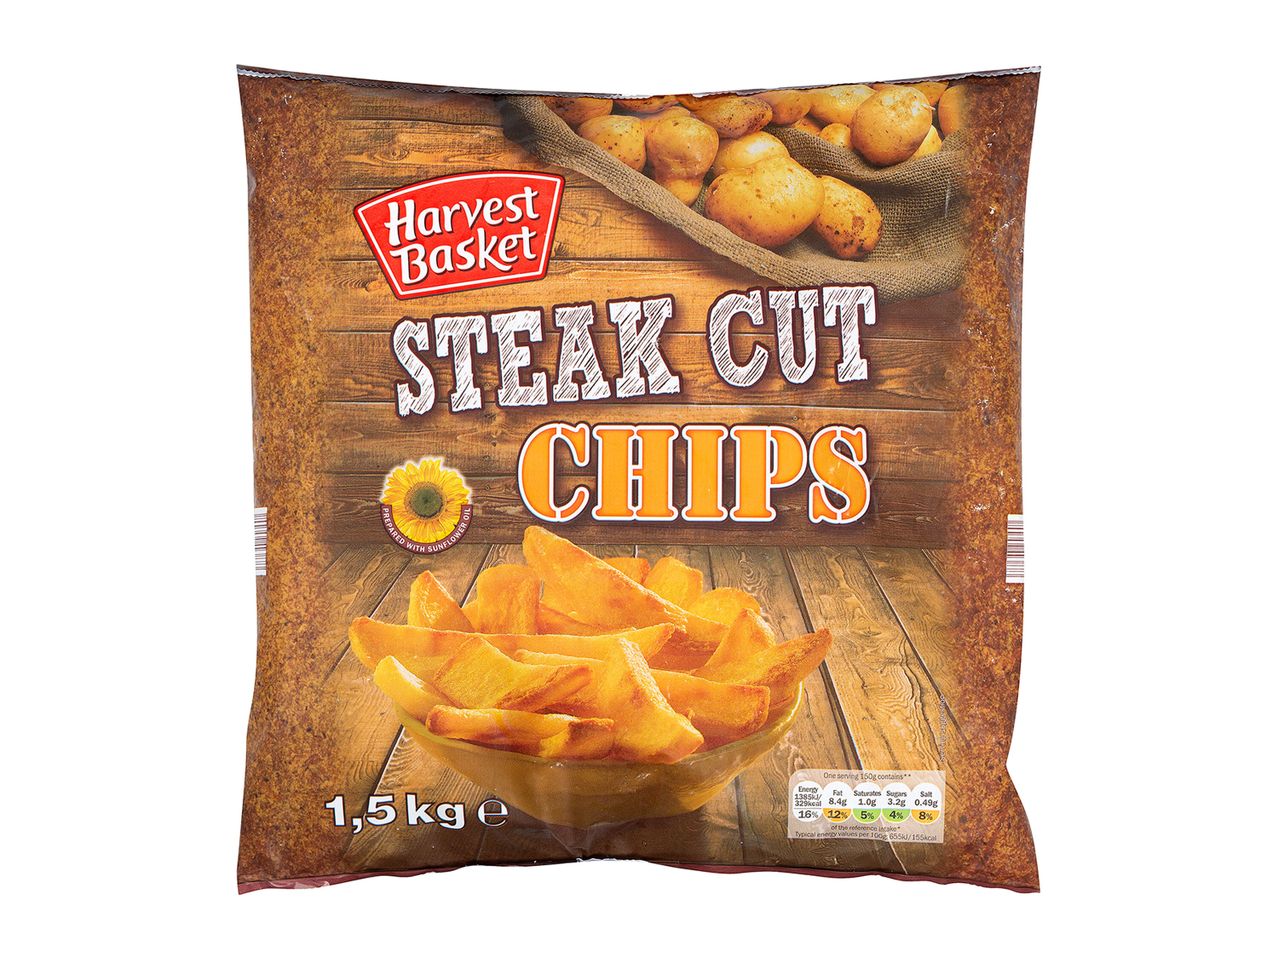 Go to full screen view: Harvest Basket Steak Cut Chips - Image 1